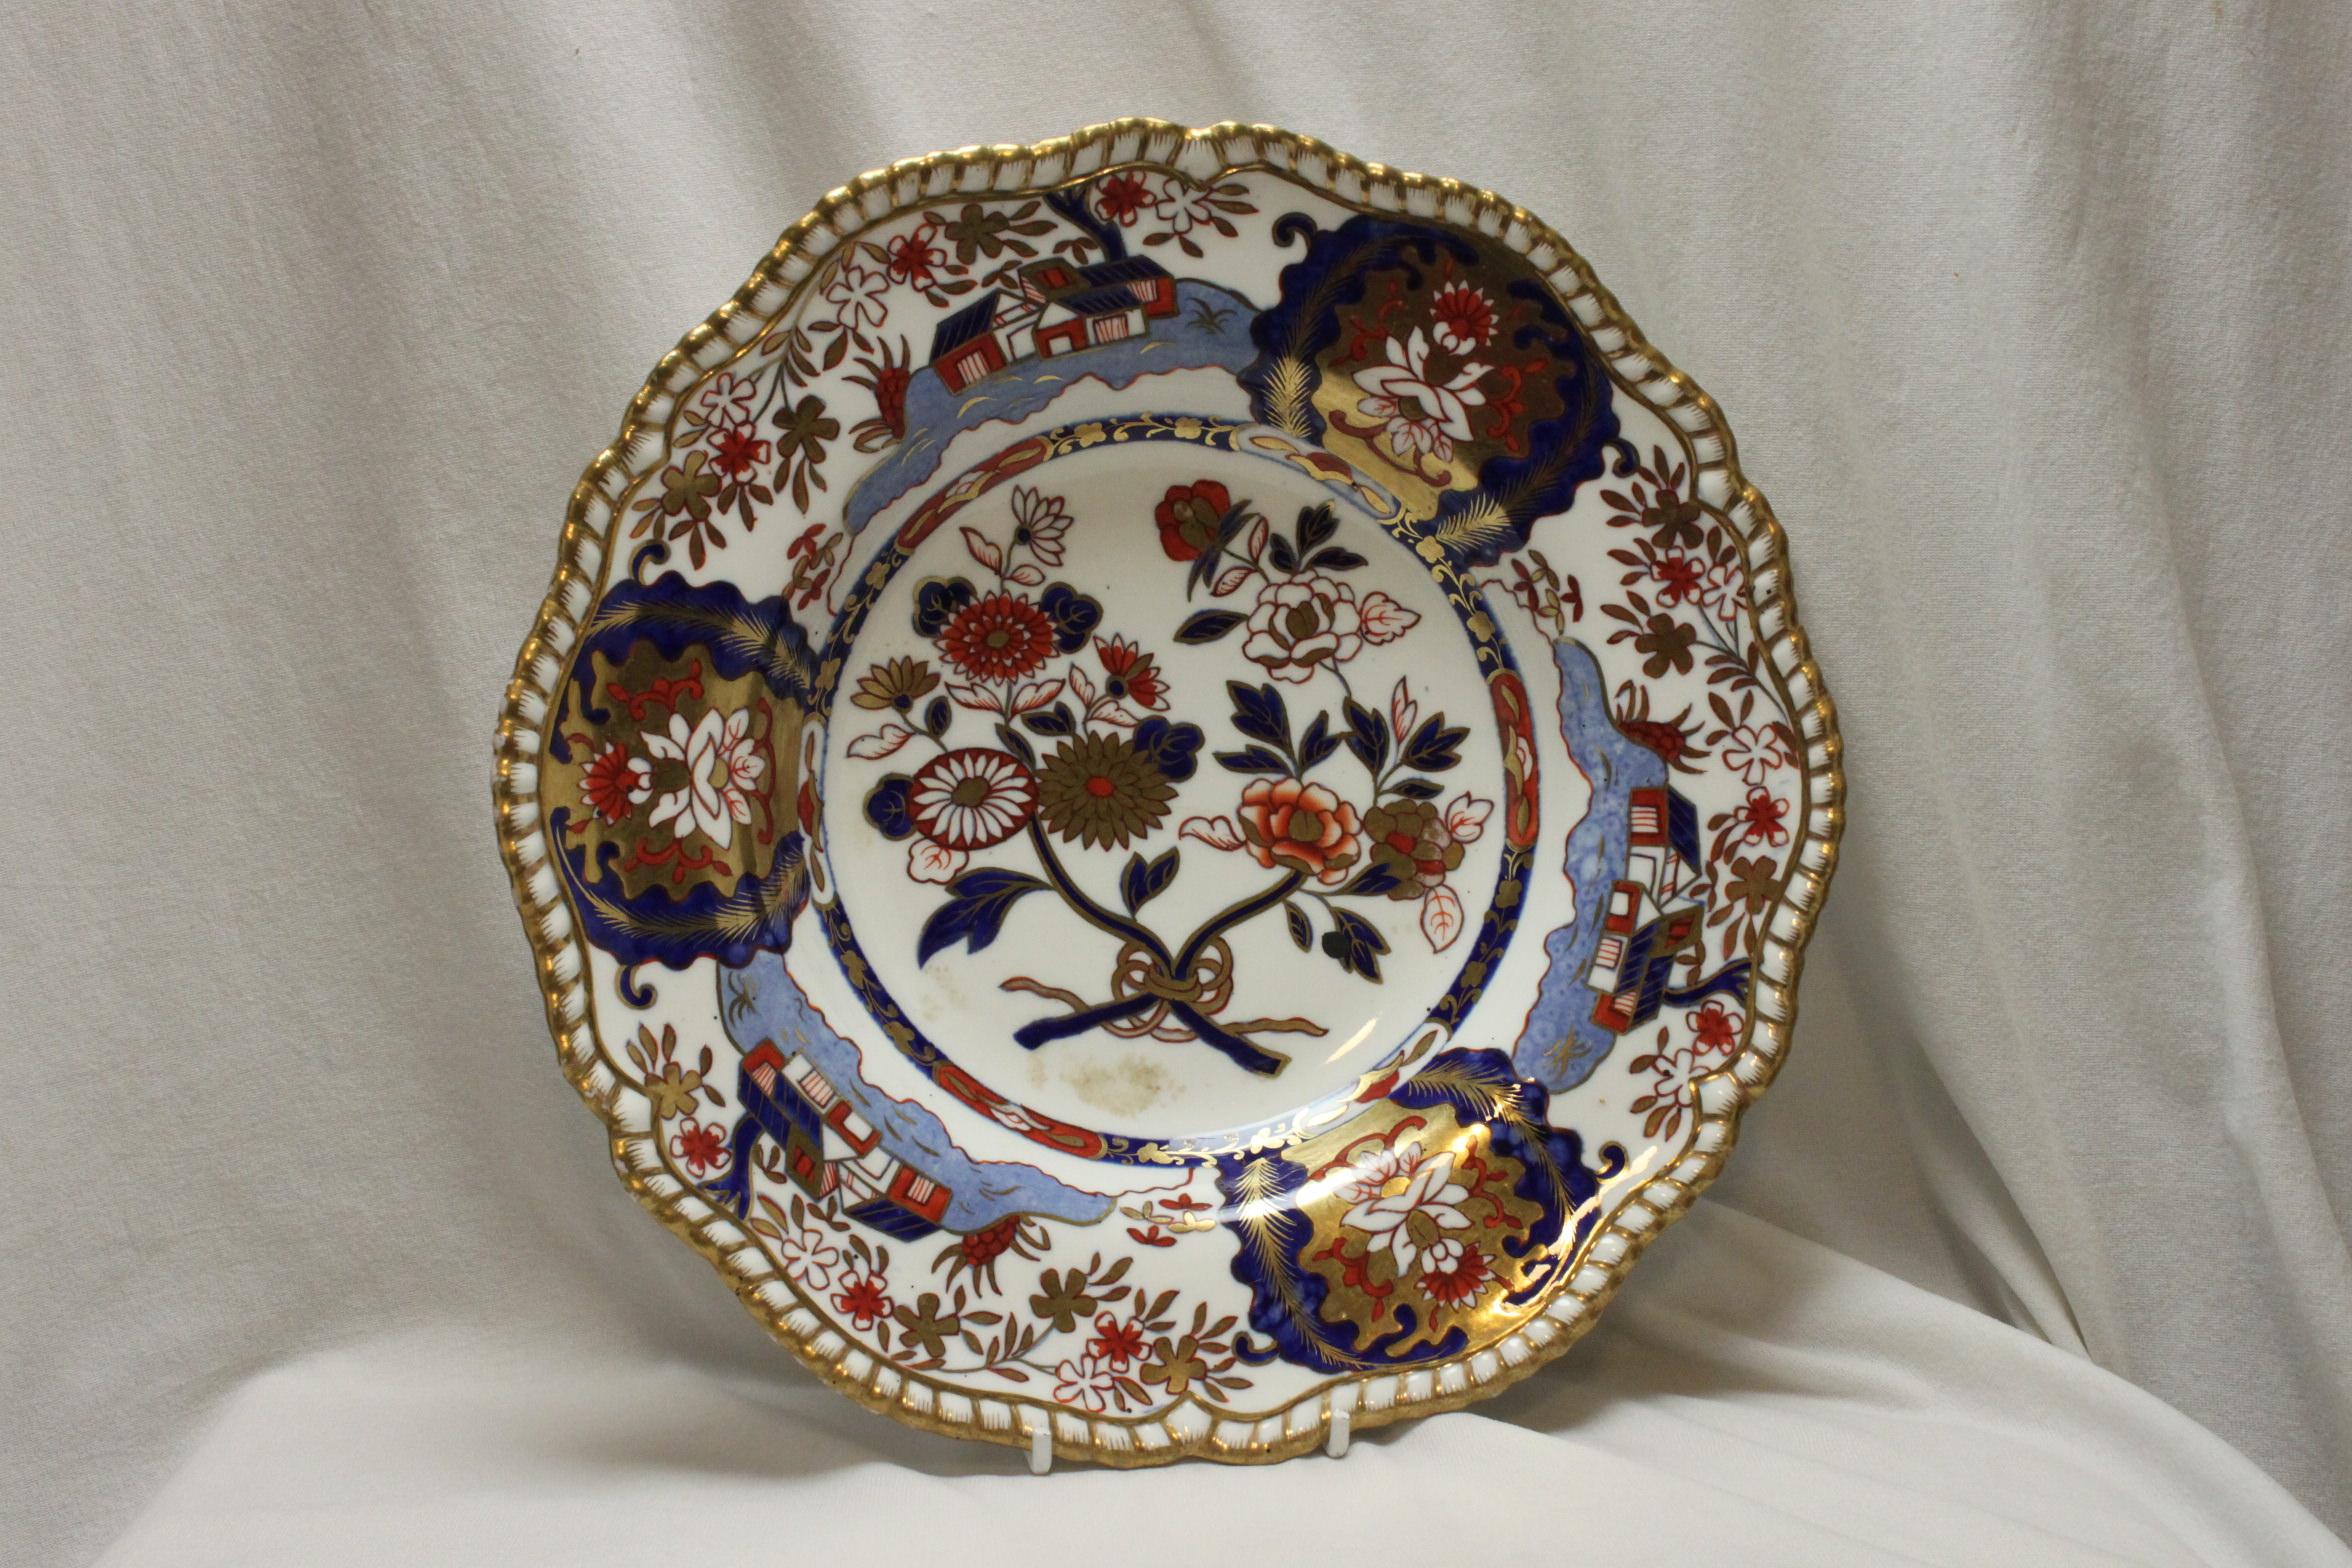 This very attractive Spode set of seven pieces is decorated with their Japan or Imari pattern number 3955. The set consists of a platter which measures 403 mm (16.25 inches) in length, 320 mm (12.75 inches) in width and it stands 48 mm (2 inches)